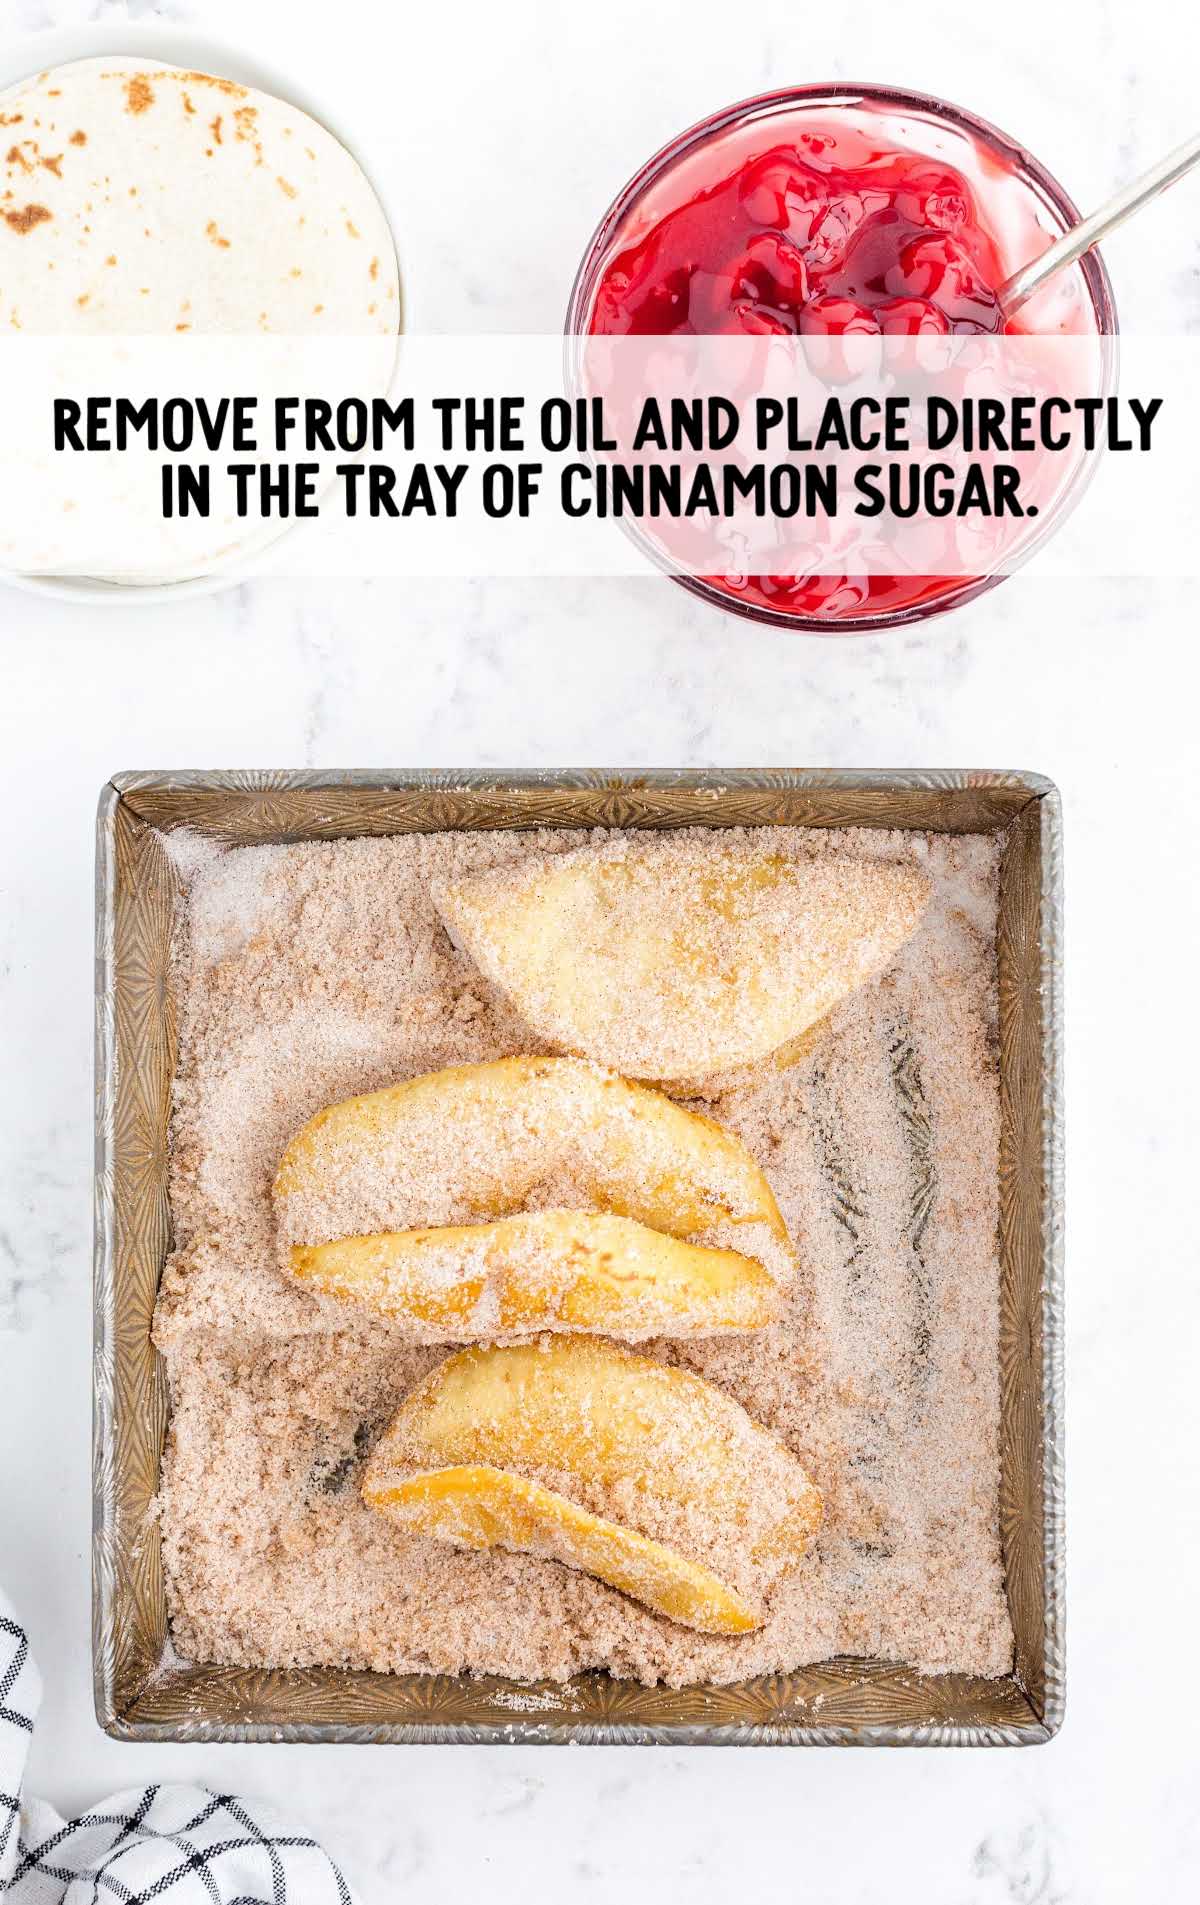 place tacos on a tray of cinnamon sugar